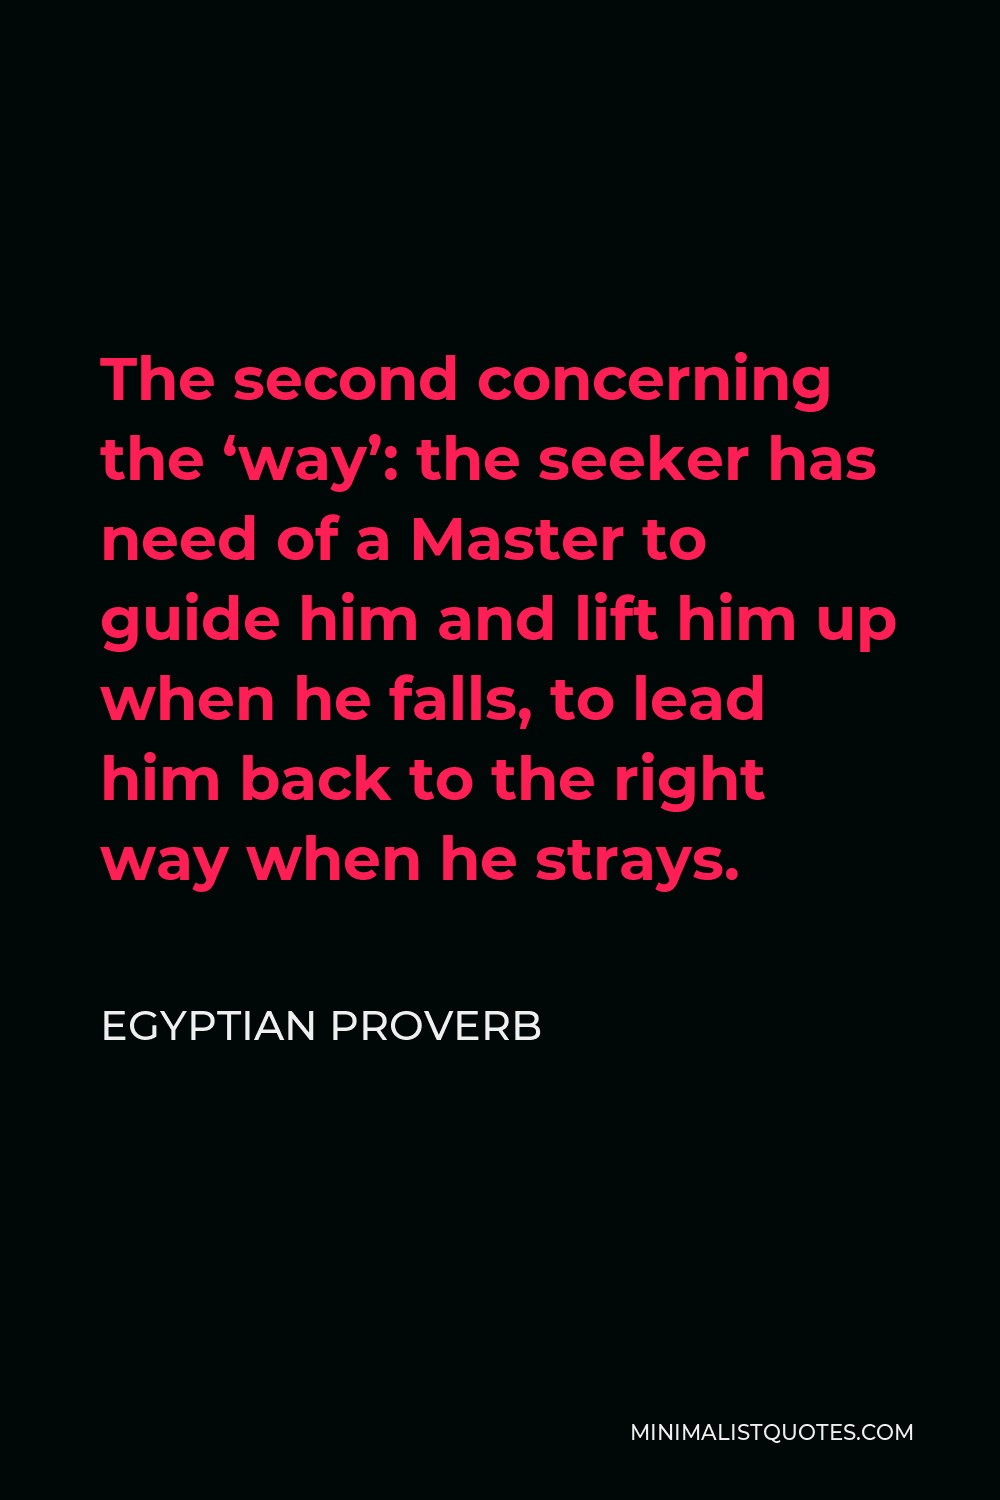 Egyptian Proverb Quote - The second concerning the ‘way’: the seeker has need of a Master to guide him and lift him up when he falls, to lead him back to the right way when he strays.